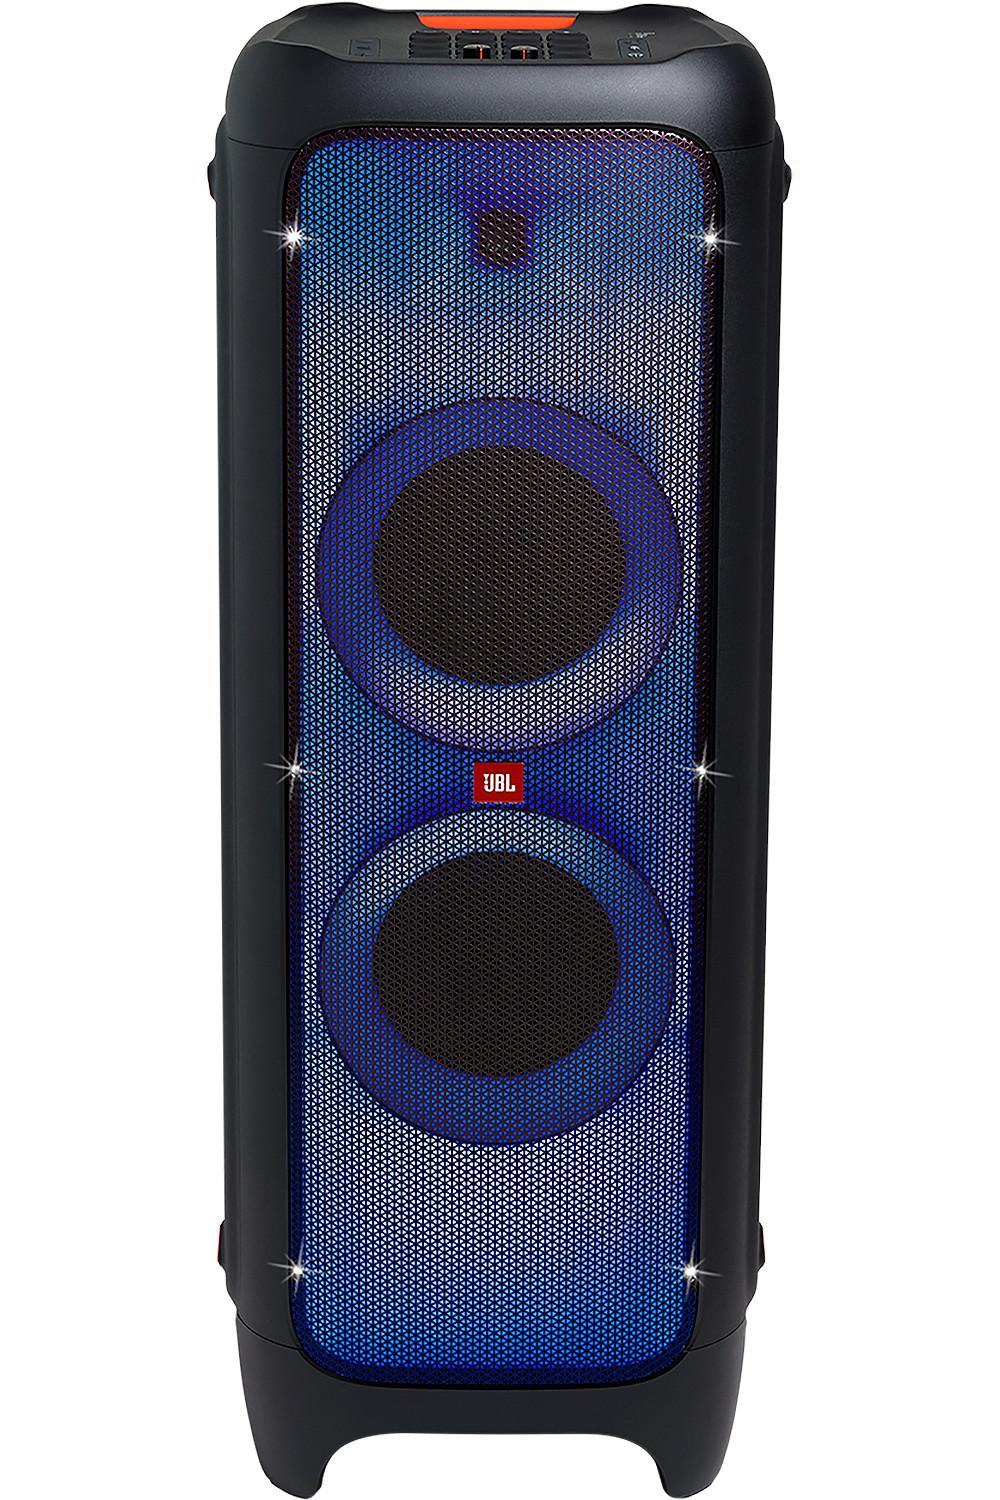 Persoon belast met sportgame abces Gewoon Rent to Own JBL Party Box 1000 Portable Bluetooth Speaker at Aaron's today!